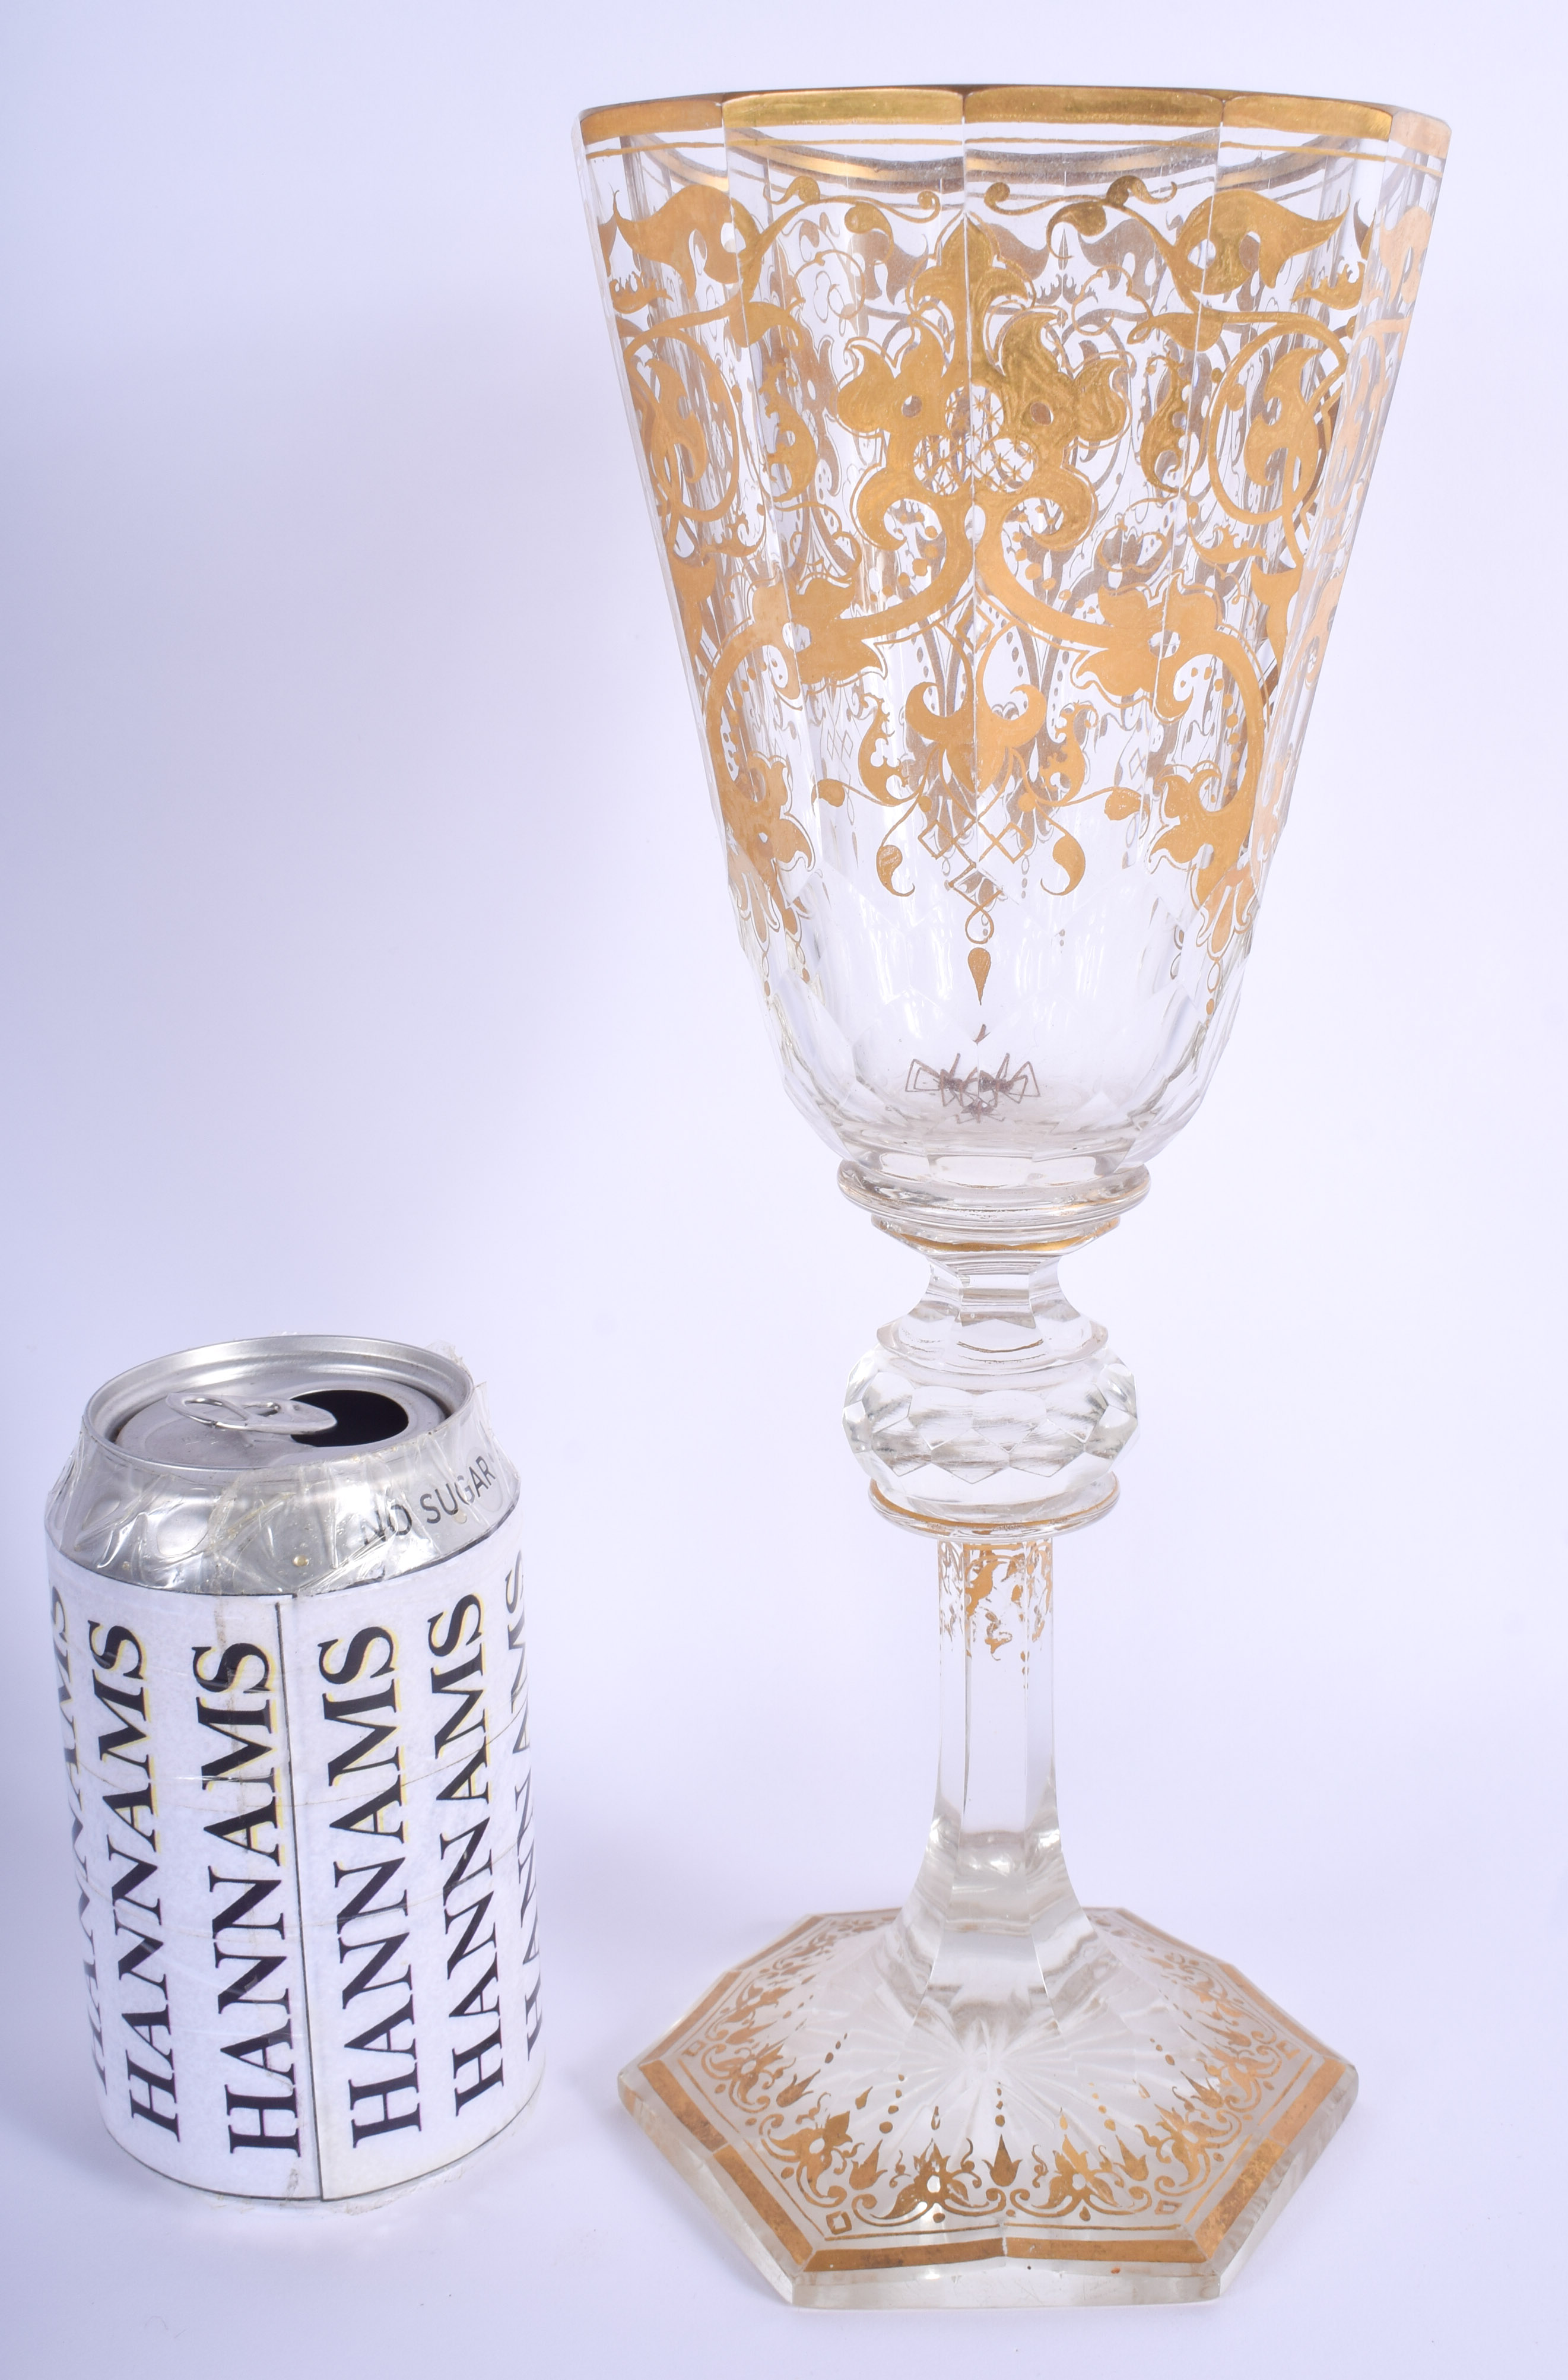 A LARGE 19TH CENTURY BOHEMIAN GILT DECORATED GLASS GOBLET highlighted with scrolling vines. 28.5 cm